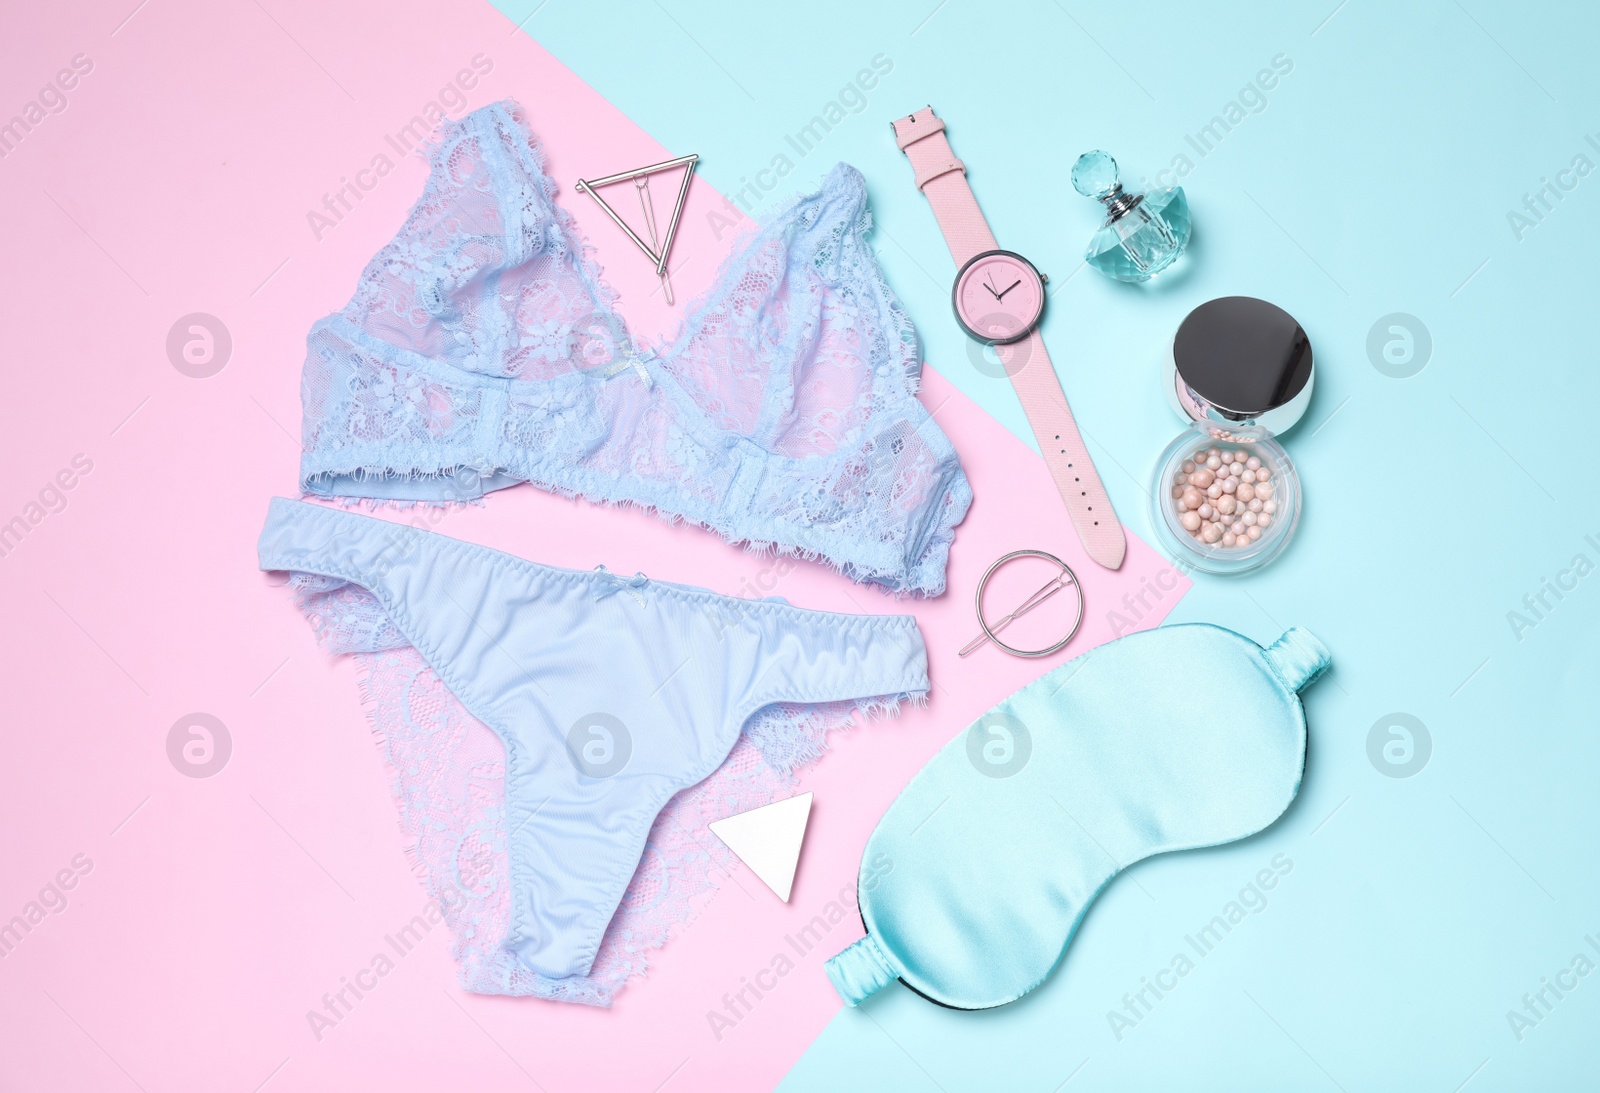 Photo of Flat lay composition with stylish lingerie and accessories on color background